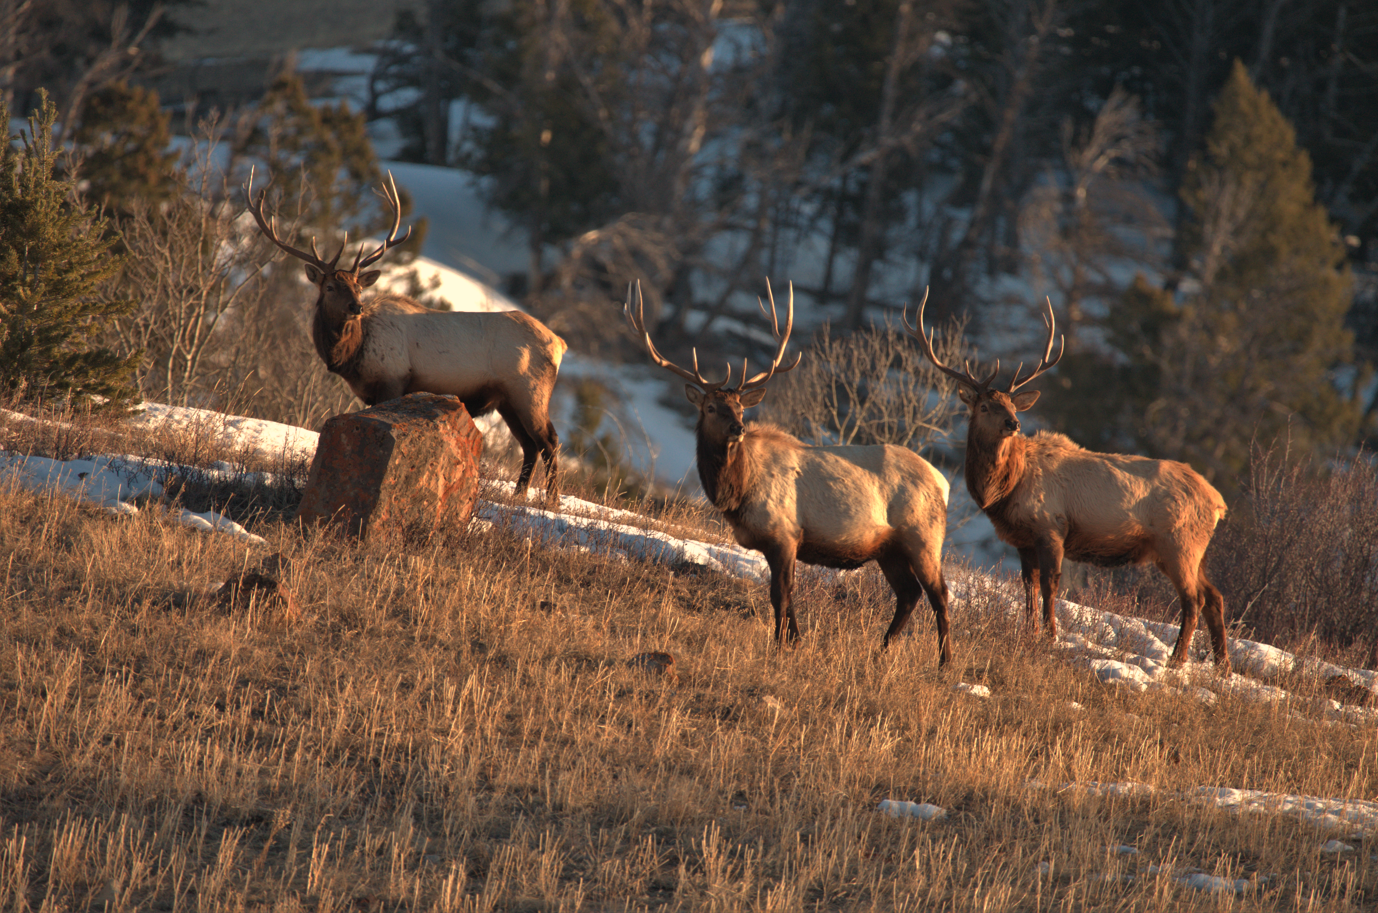 Three male elk with large antlers stand on a grassy hill, morning sun glancing off their coats.